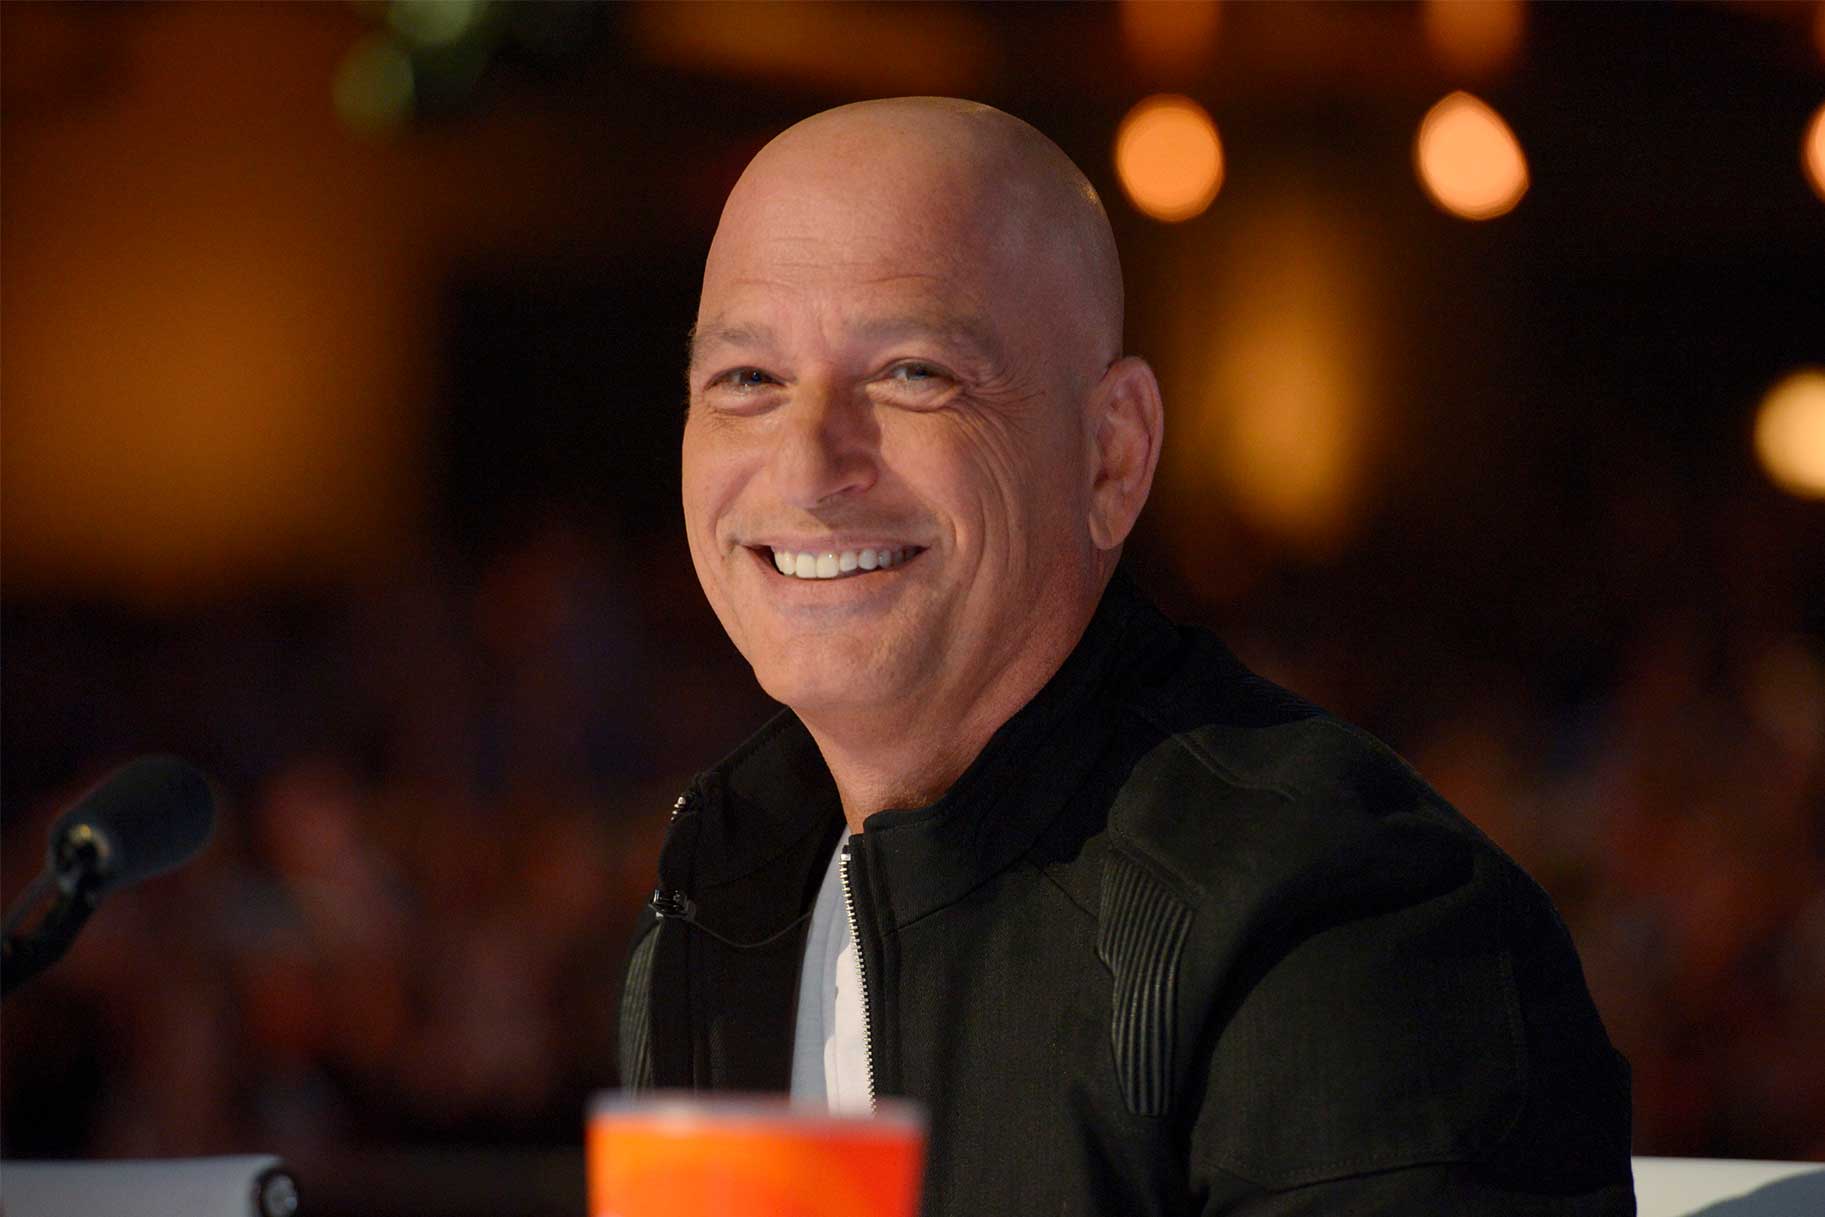 Pictured: Howie Mandel